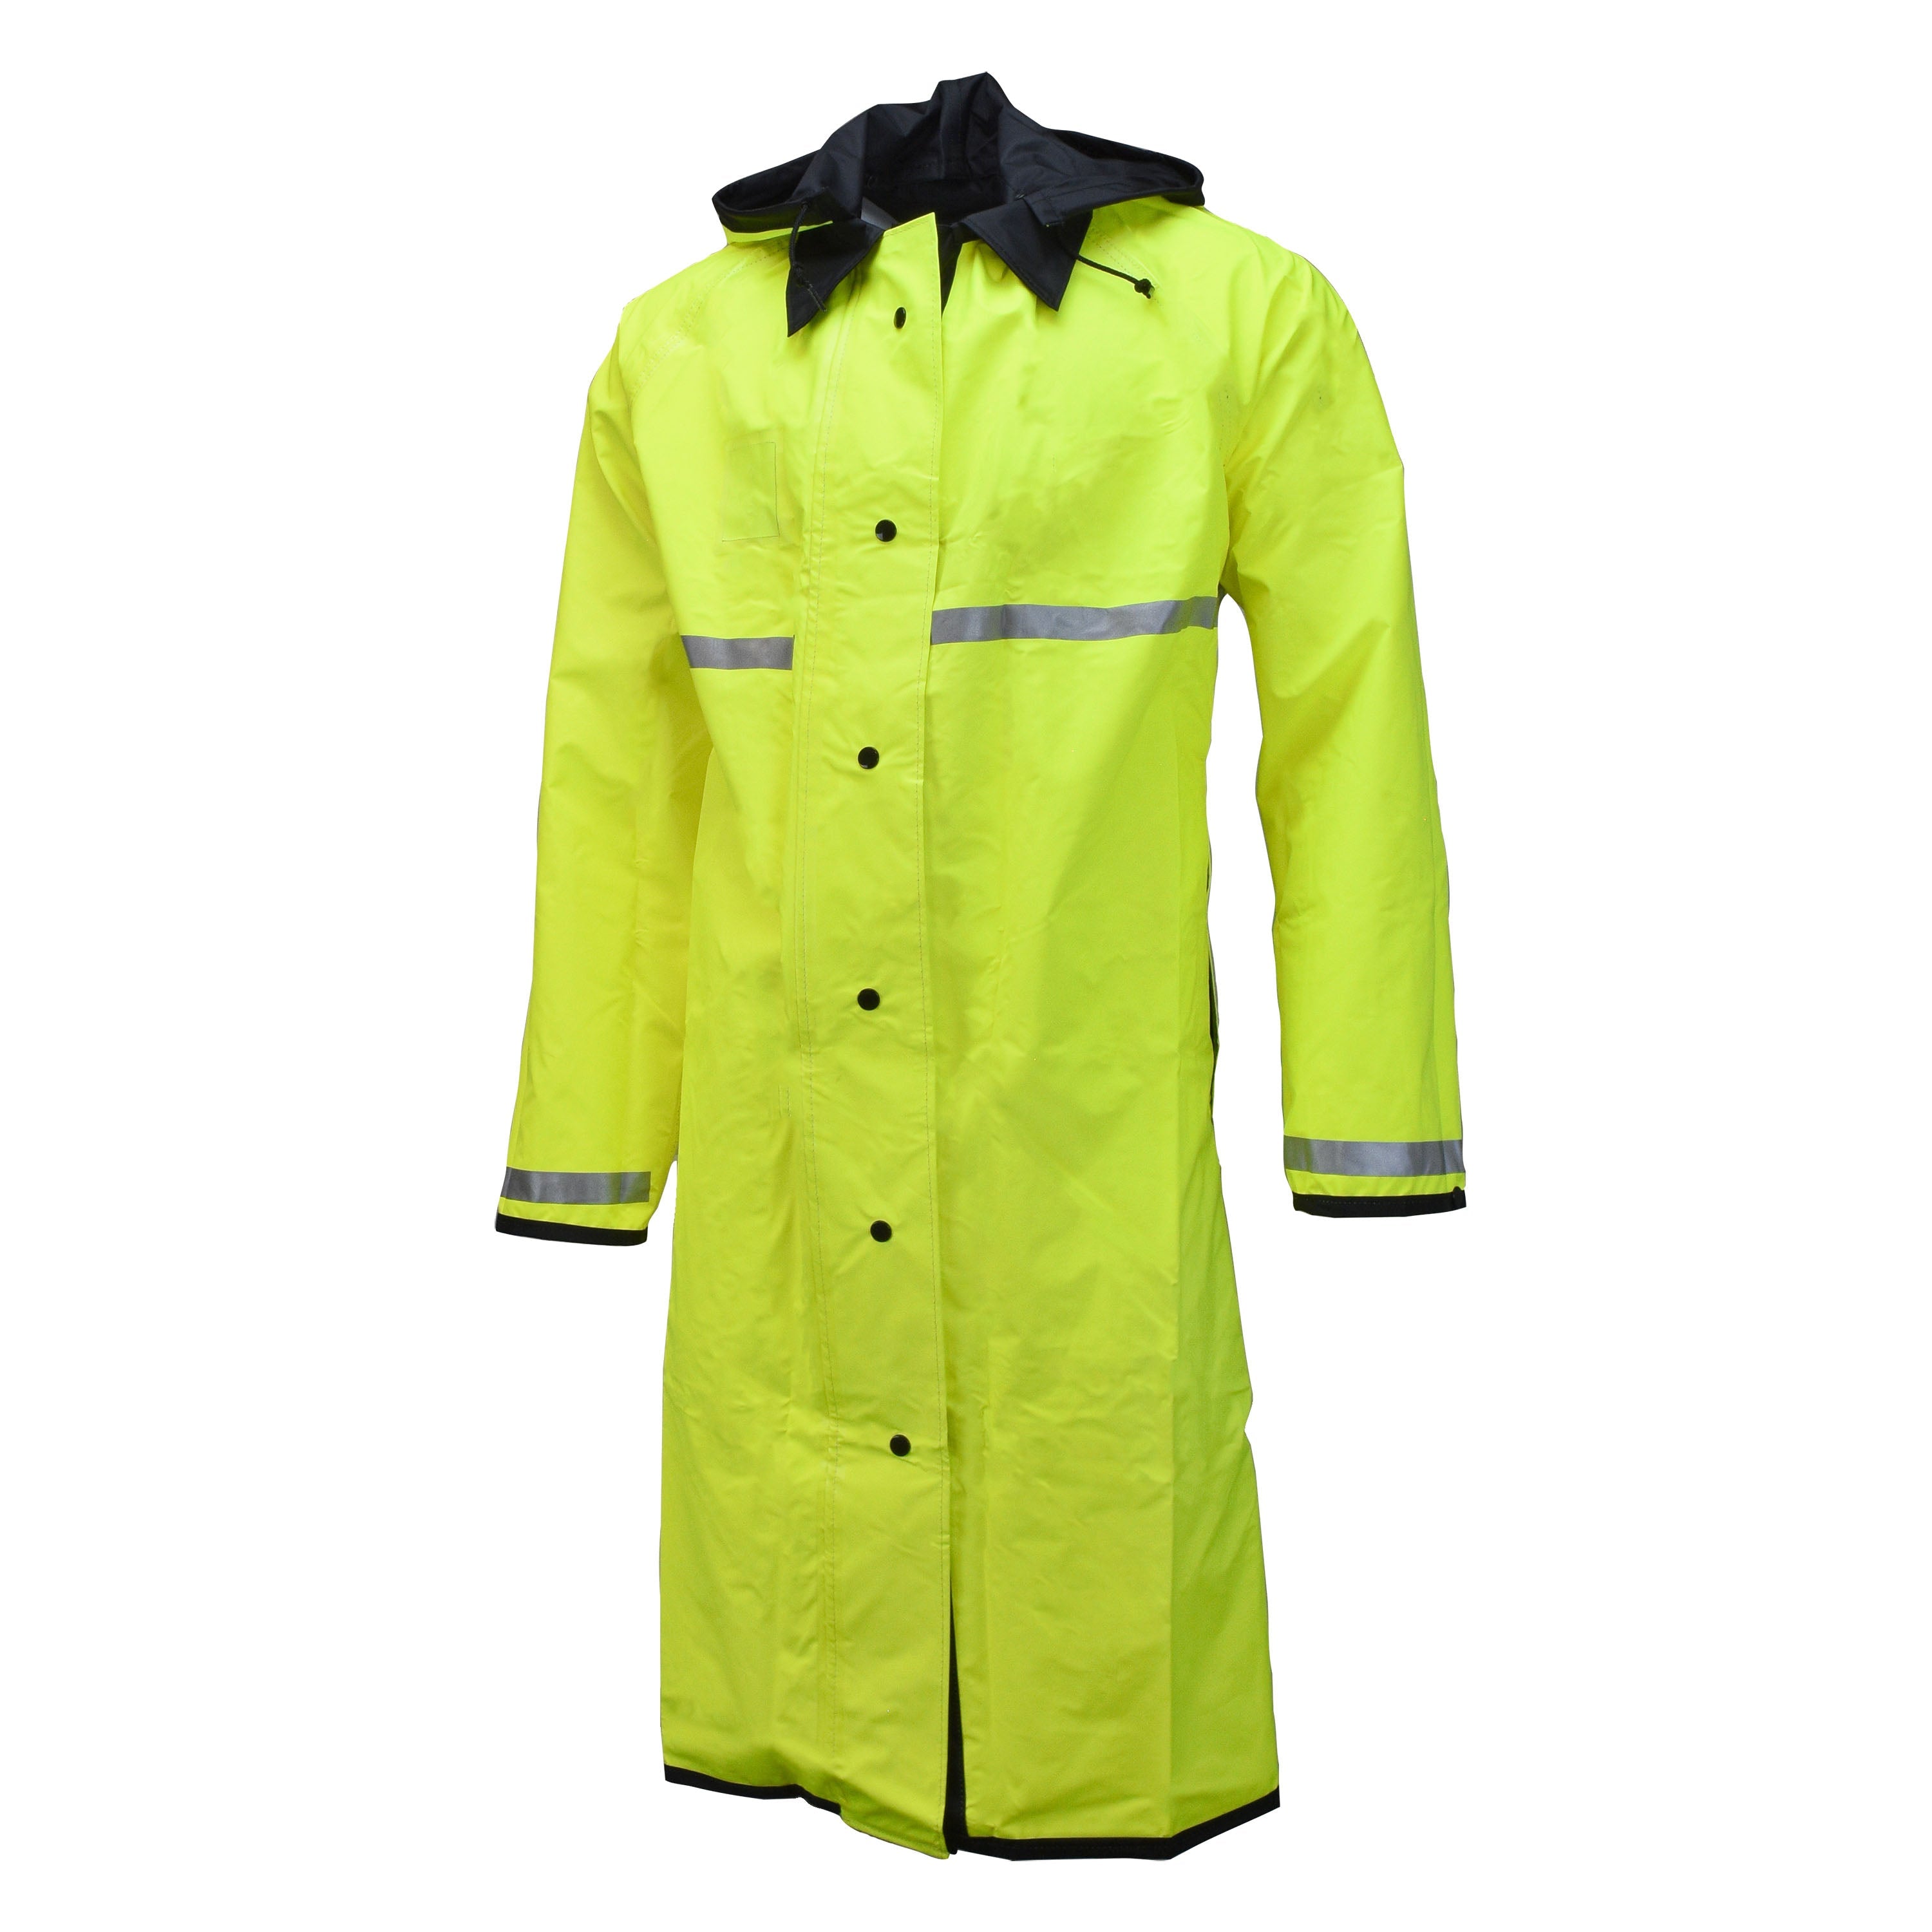 Neese 475RCH3M Duty Series Reversible Coat with 3M Reflective Taping